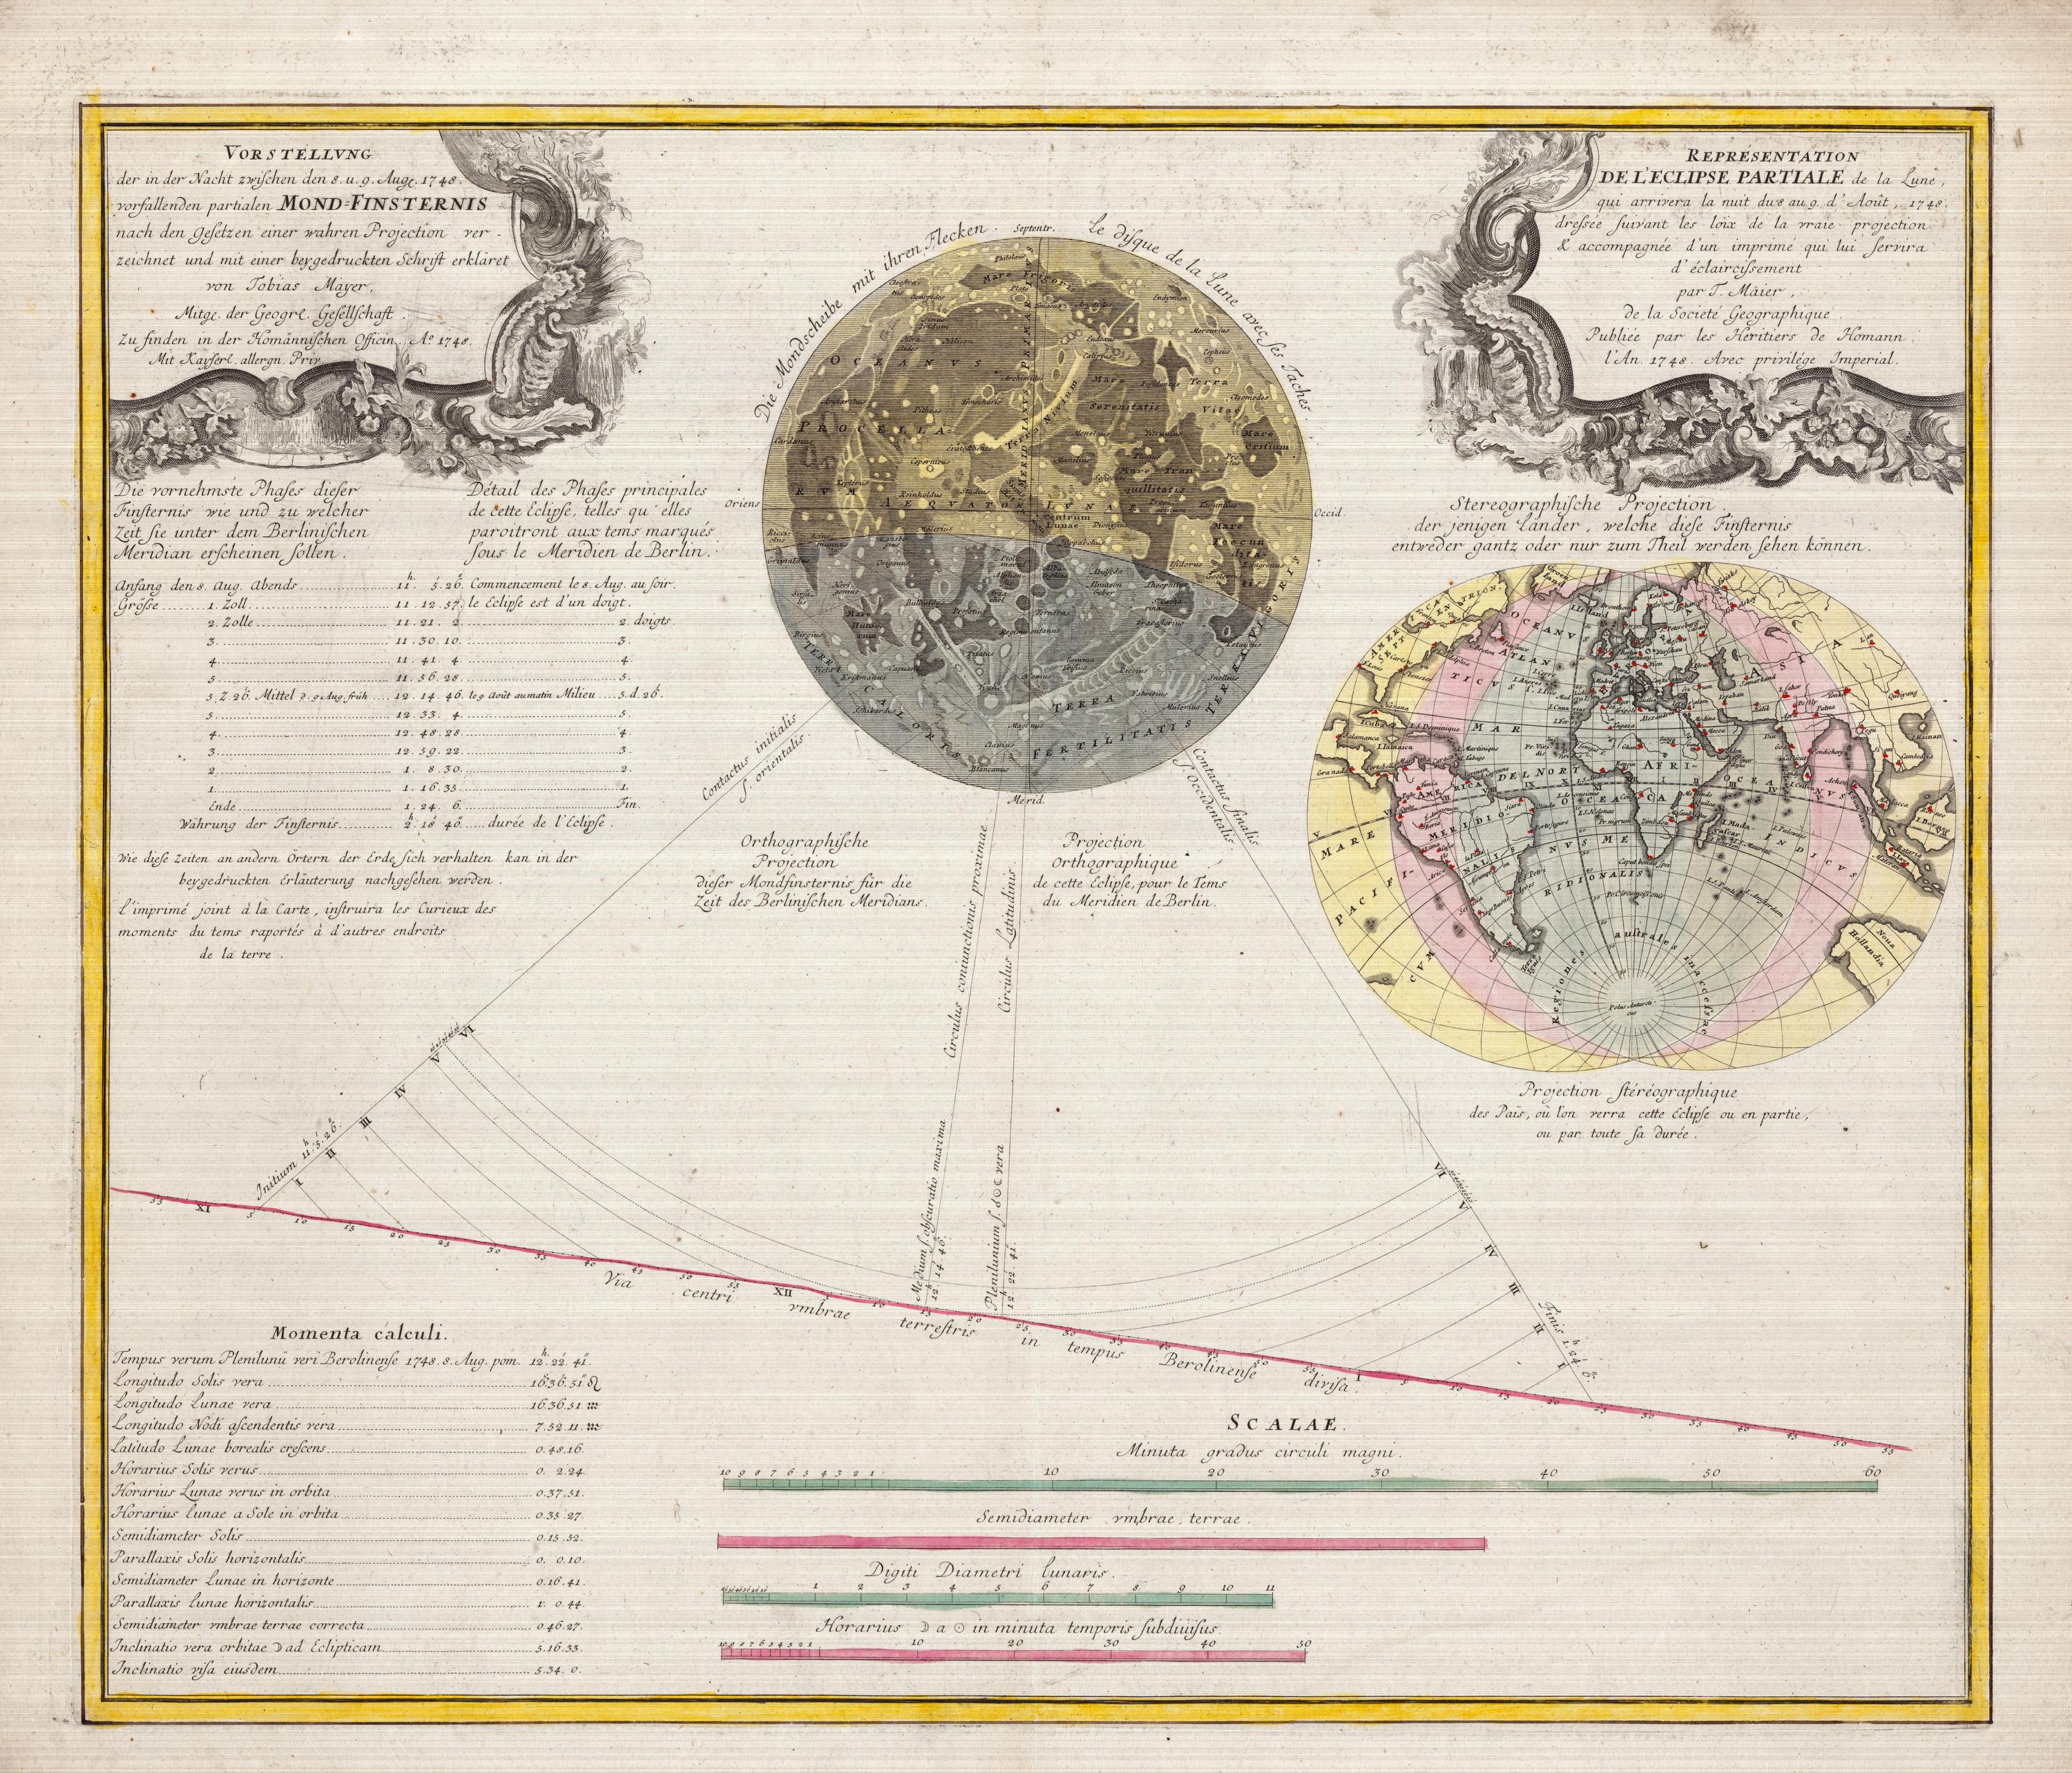 a sketch of the moon accompanied by large lines pointing to a timeline of events for a lunar eclipse. the shadow of the moon on the earth is shown in a different drawing on the right of the page. text surrounding the sketches in tables describes technical parameters of the lunar eclipse